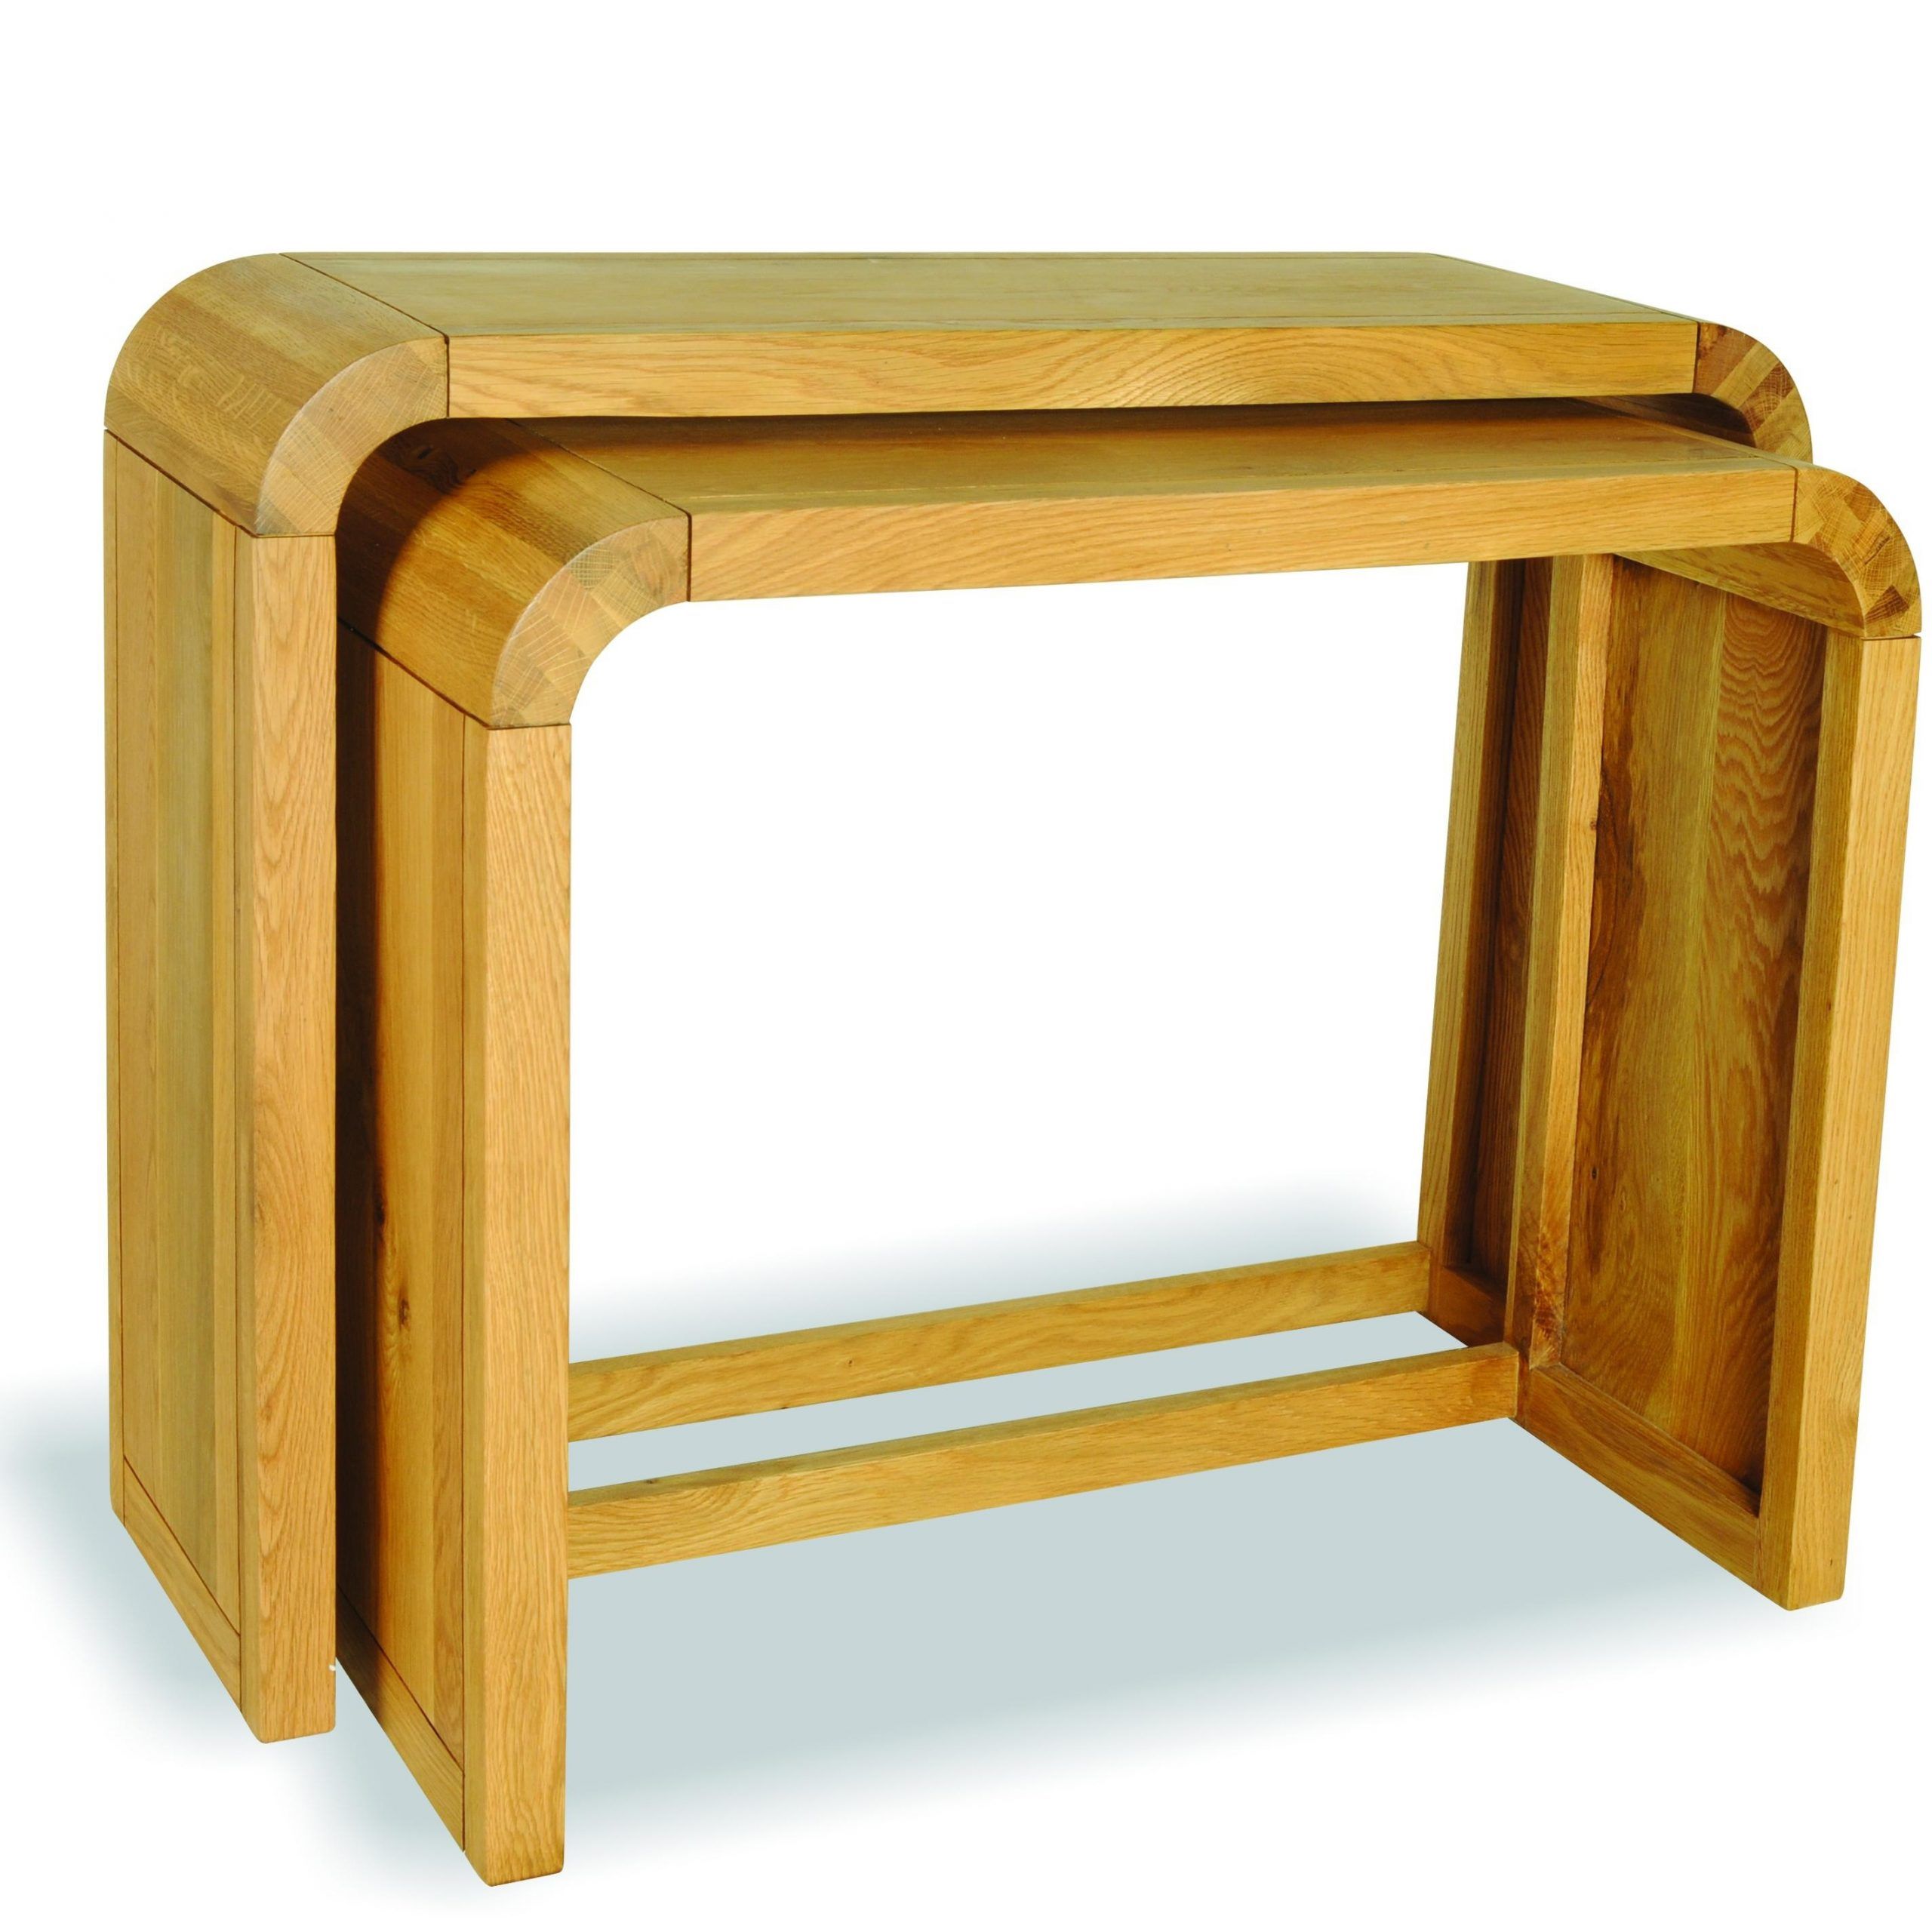 Nest 2 Oak Console Tables | Contemporary Design Wood Within Nesting Console Tables (View 12 of 20)